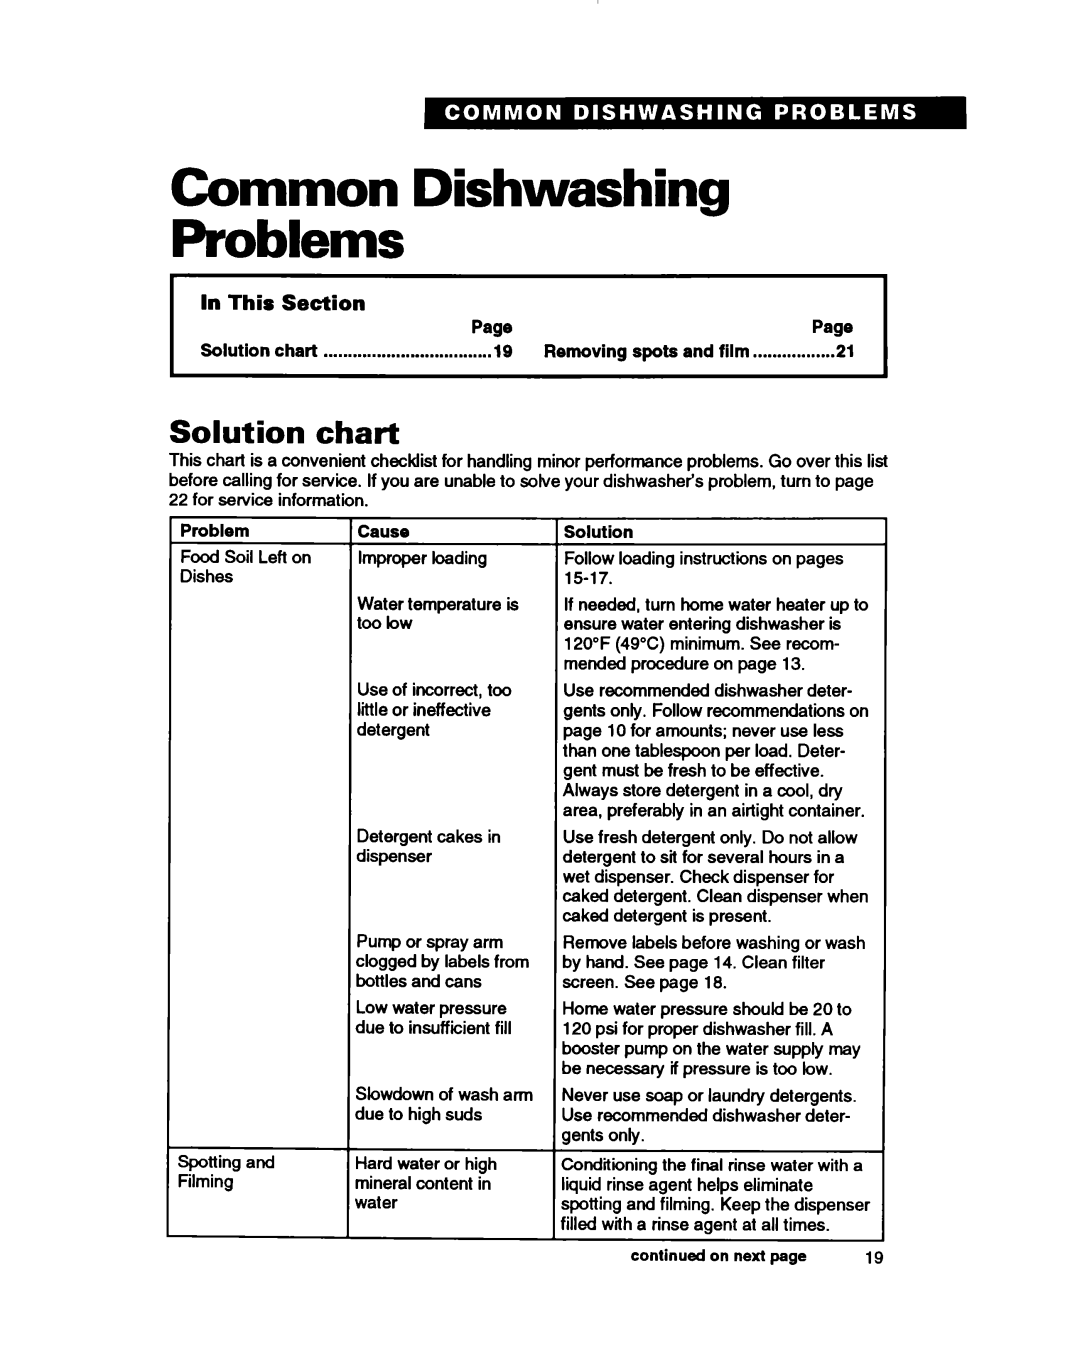 Whirlpool WU4000, WU5750 Common Dishwashing Problems, Solution chart, In This Section, Cause, continued on next page 